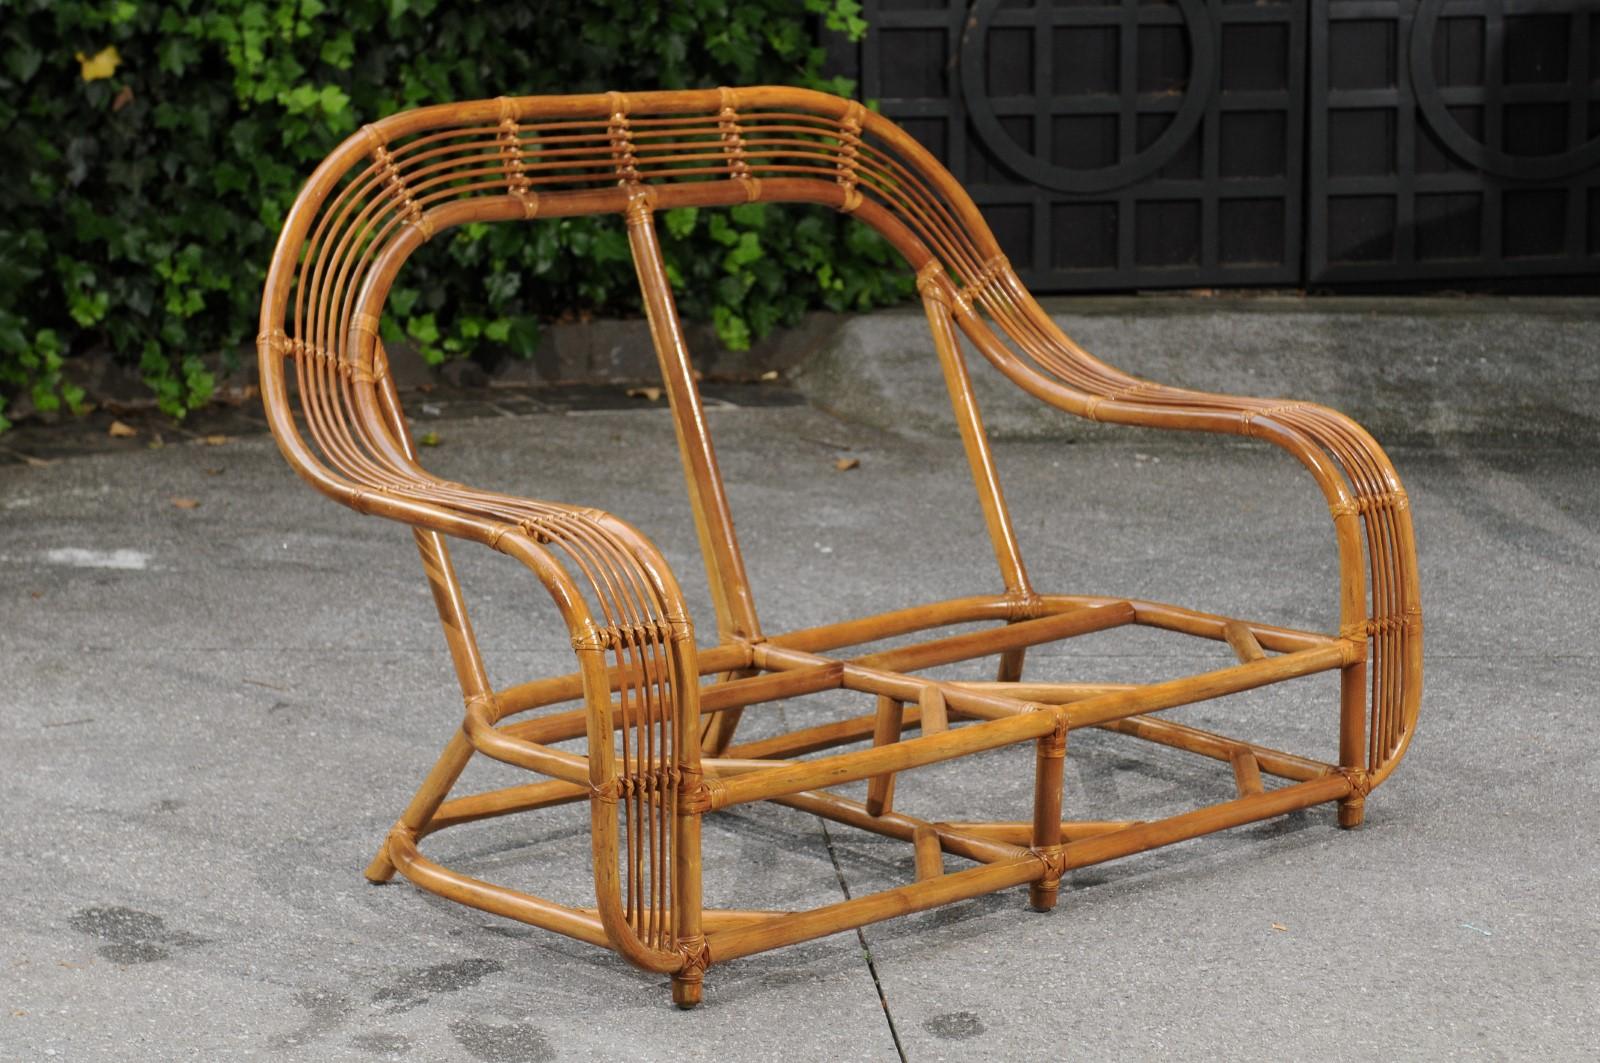 An incredibly rare pair of restored sofa frames by the Great Henry Olko for his Willow and Reed firm, circa 1978. These stunning examples are from Olko's boutique 